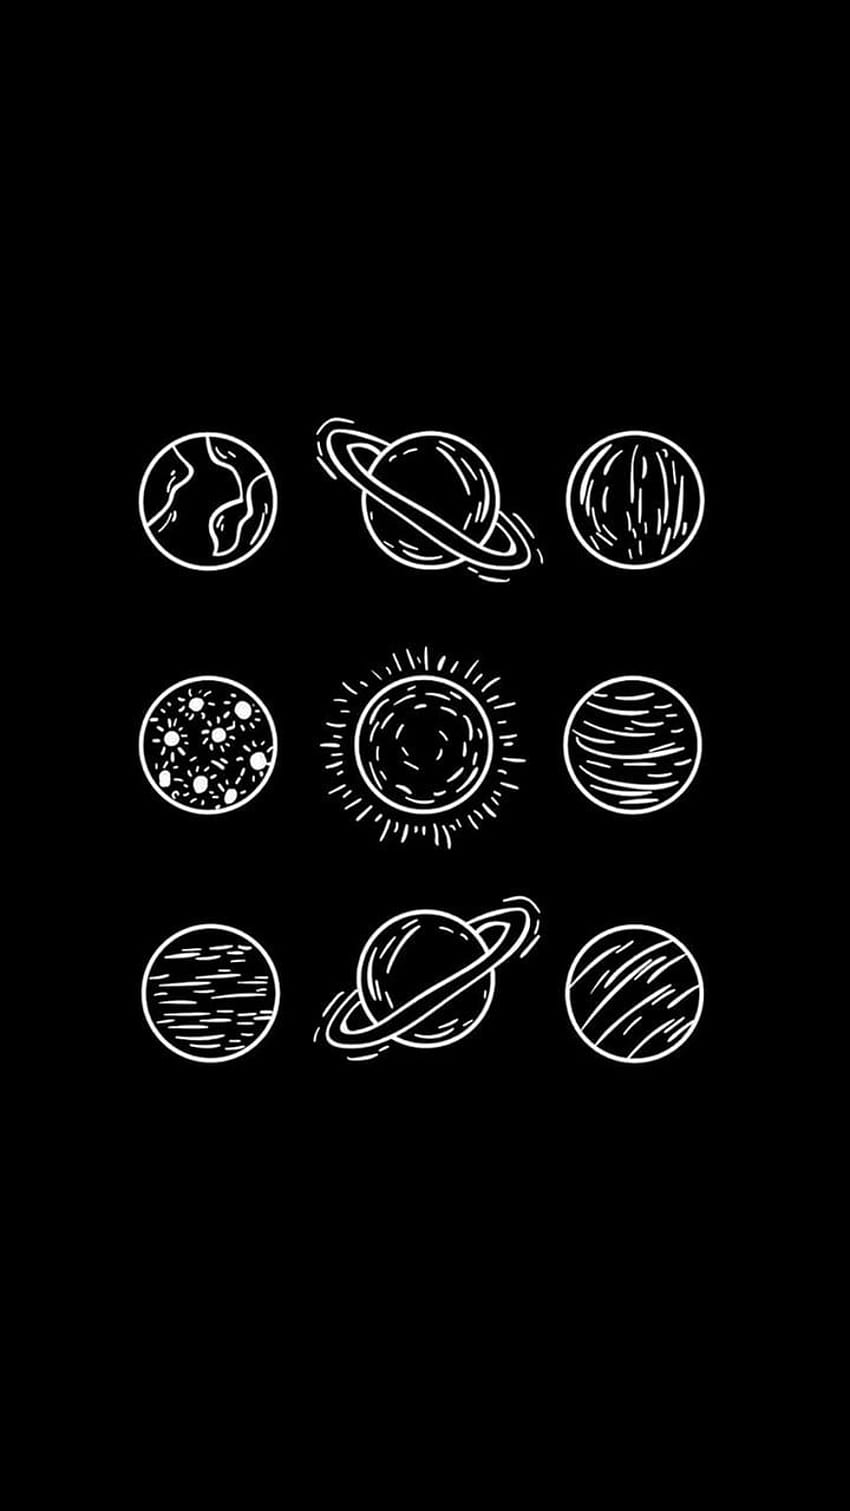 The solar system in white on a black background - Saturn, Atlas